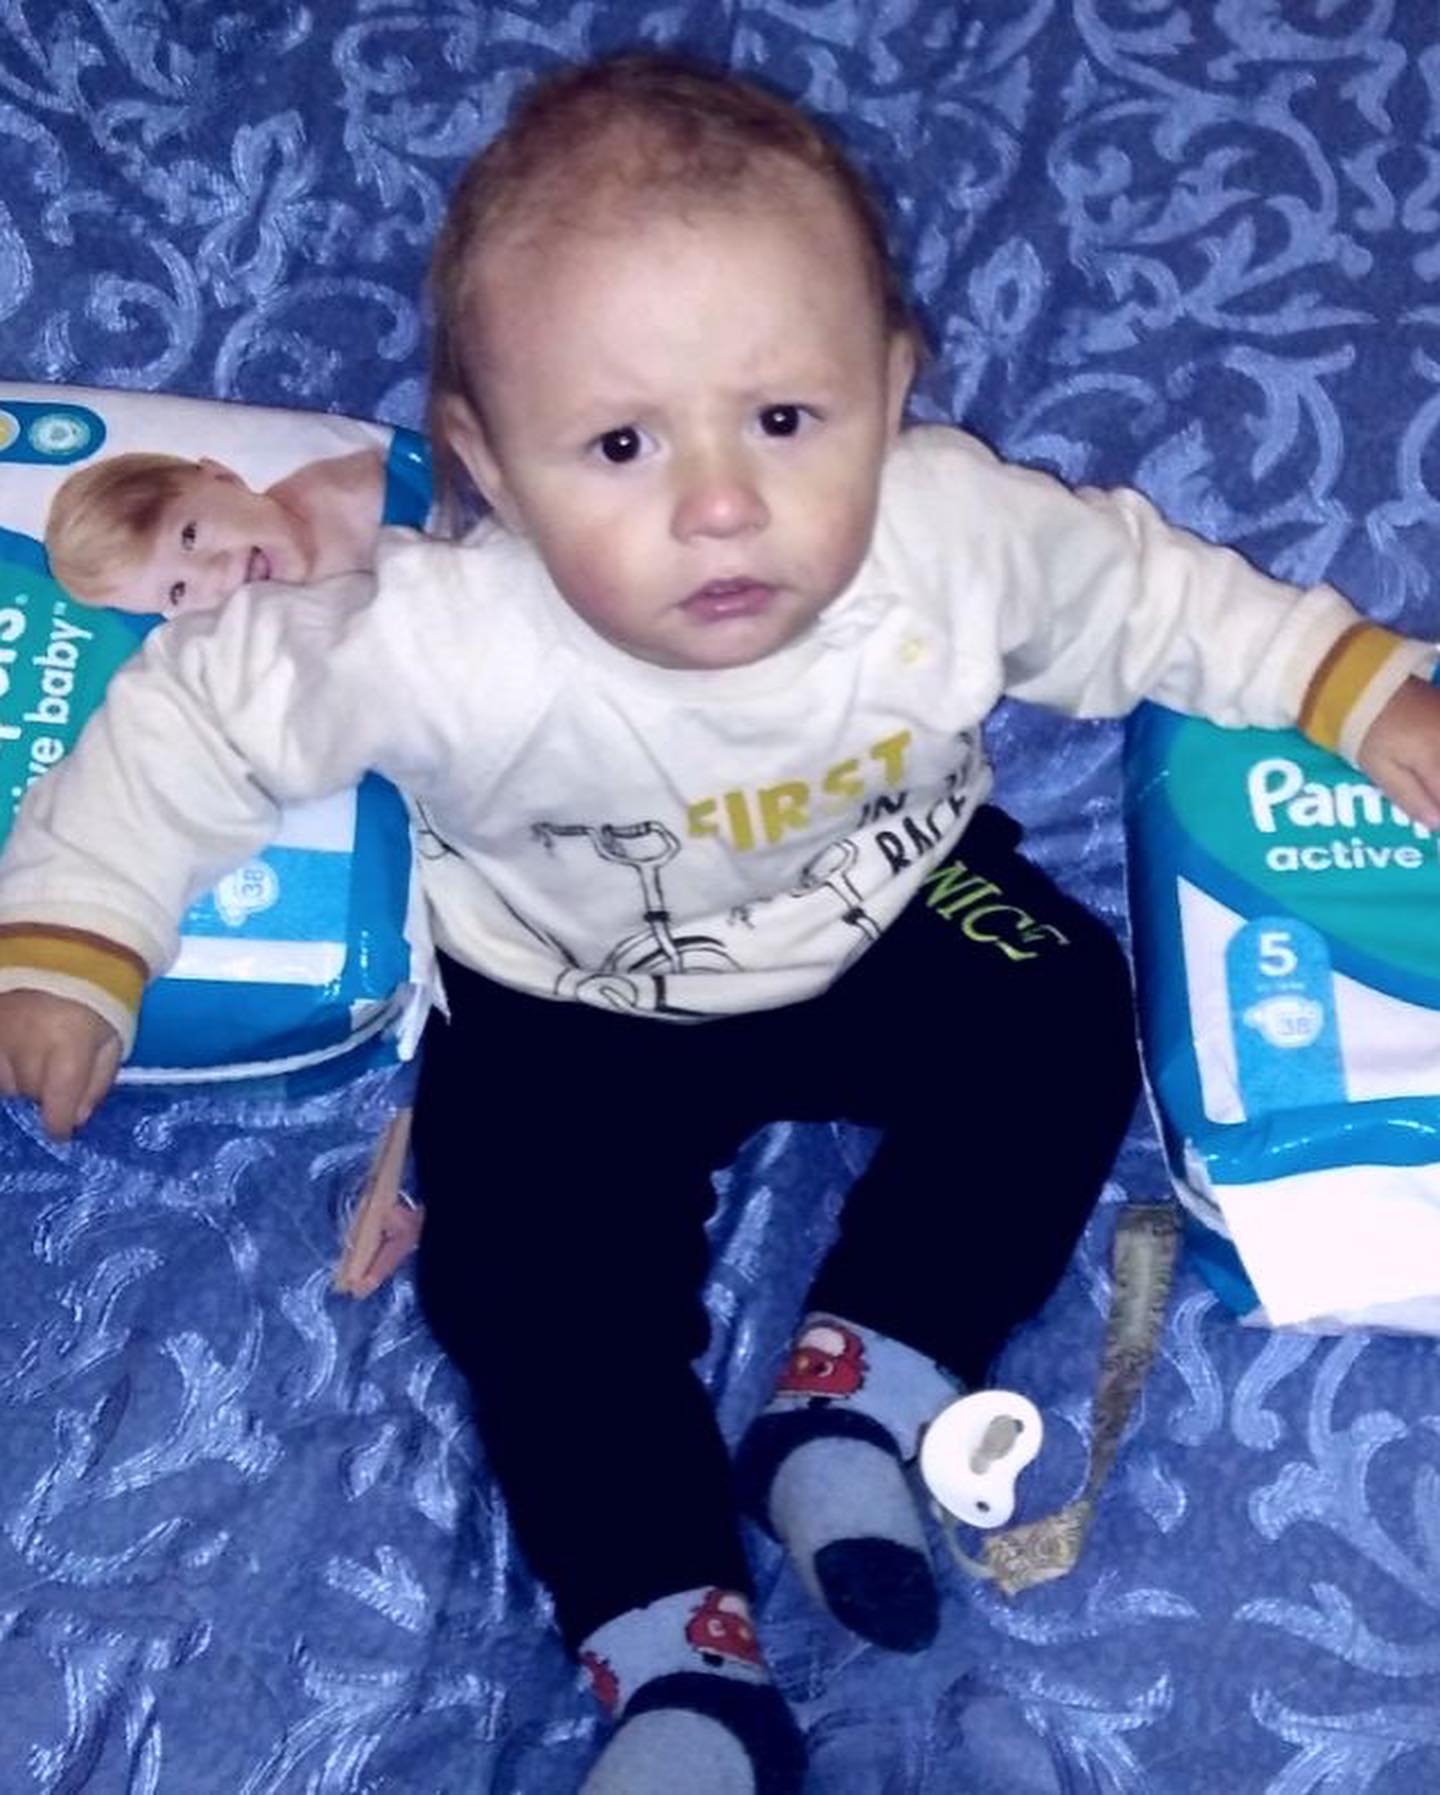 A baby sitting on a bed with a pack of diapers.